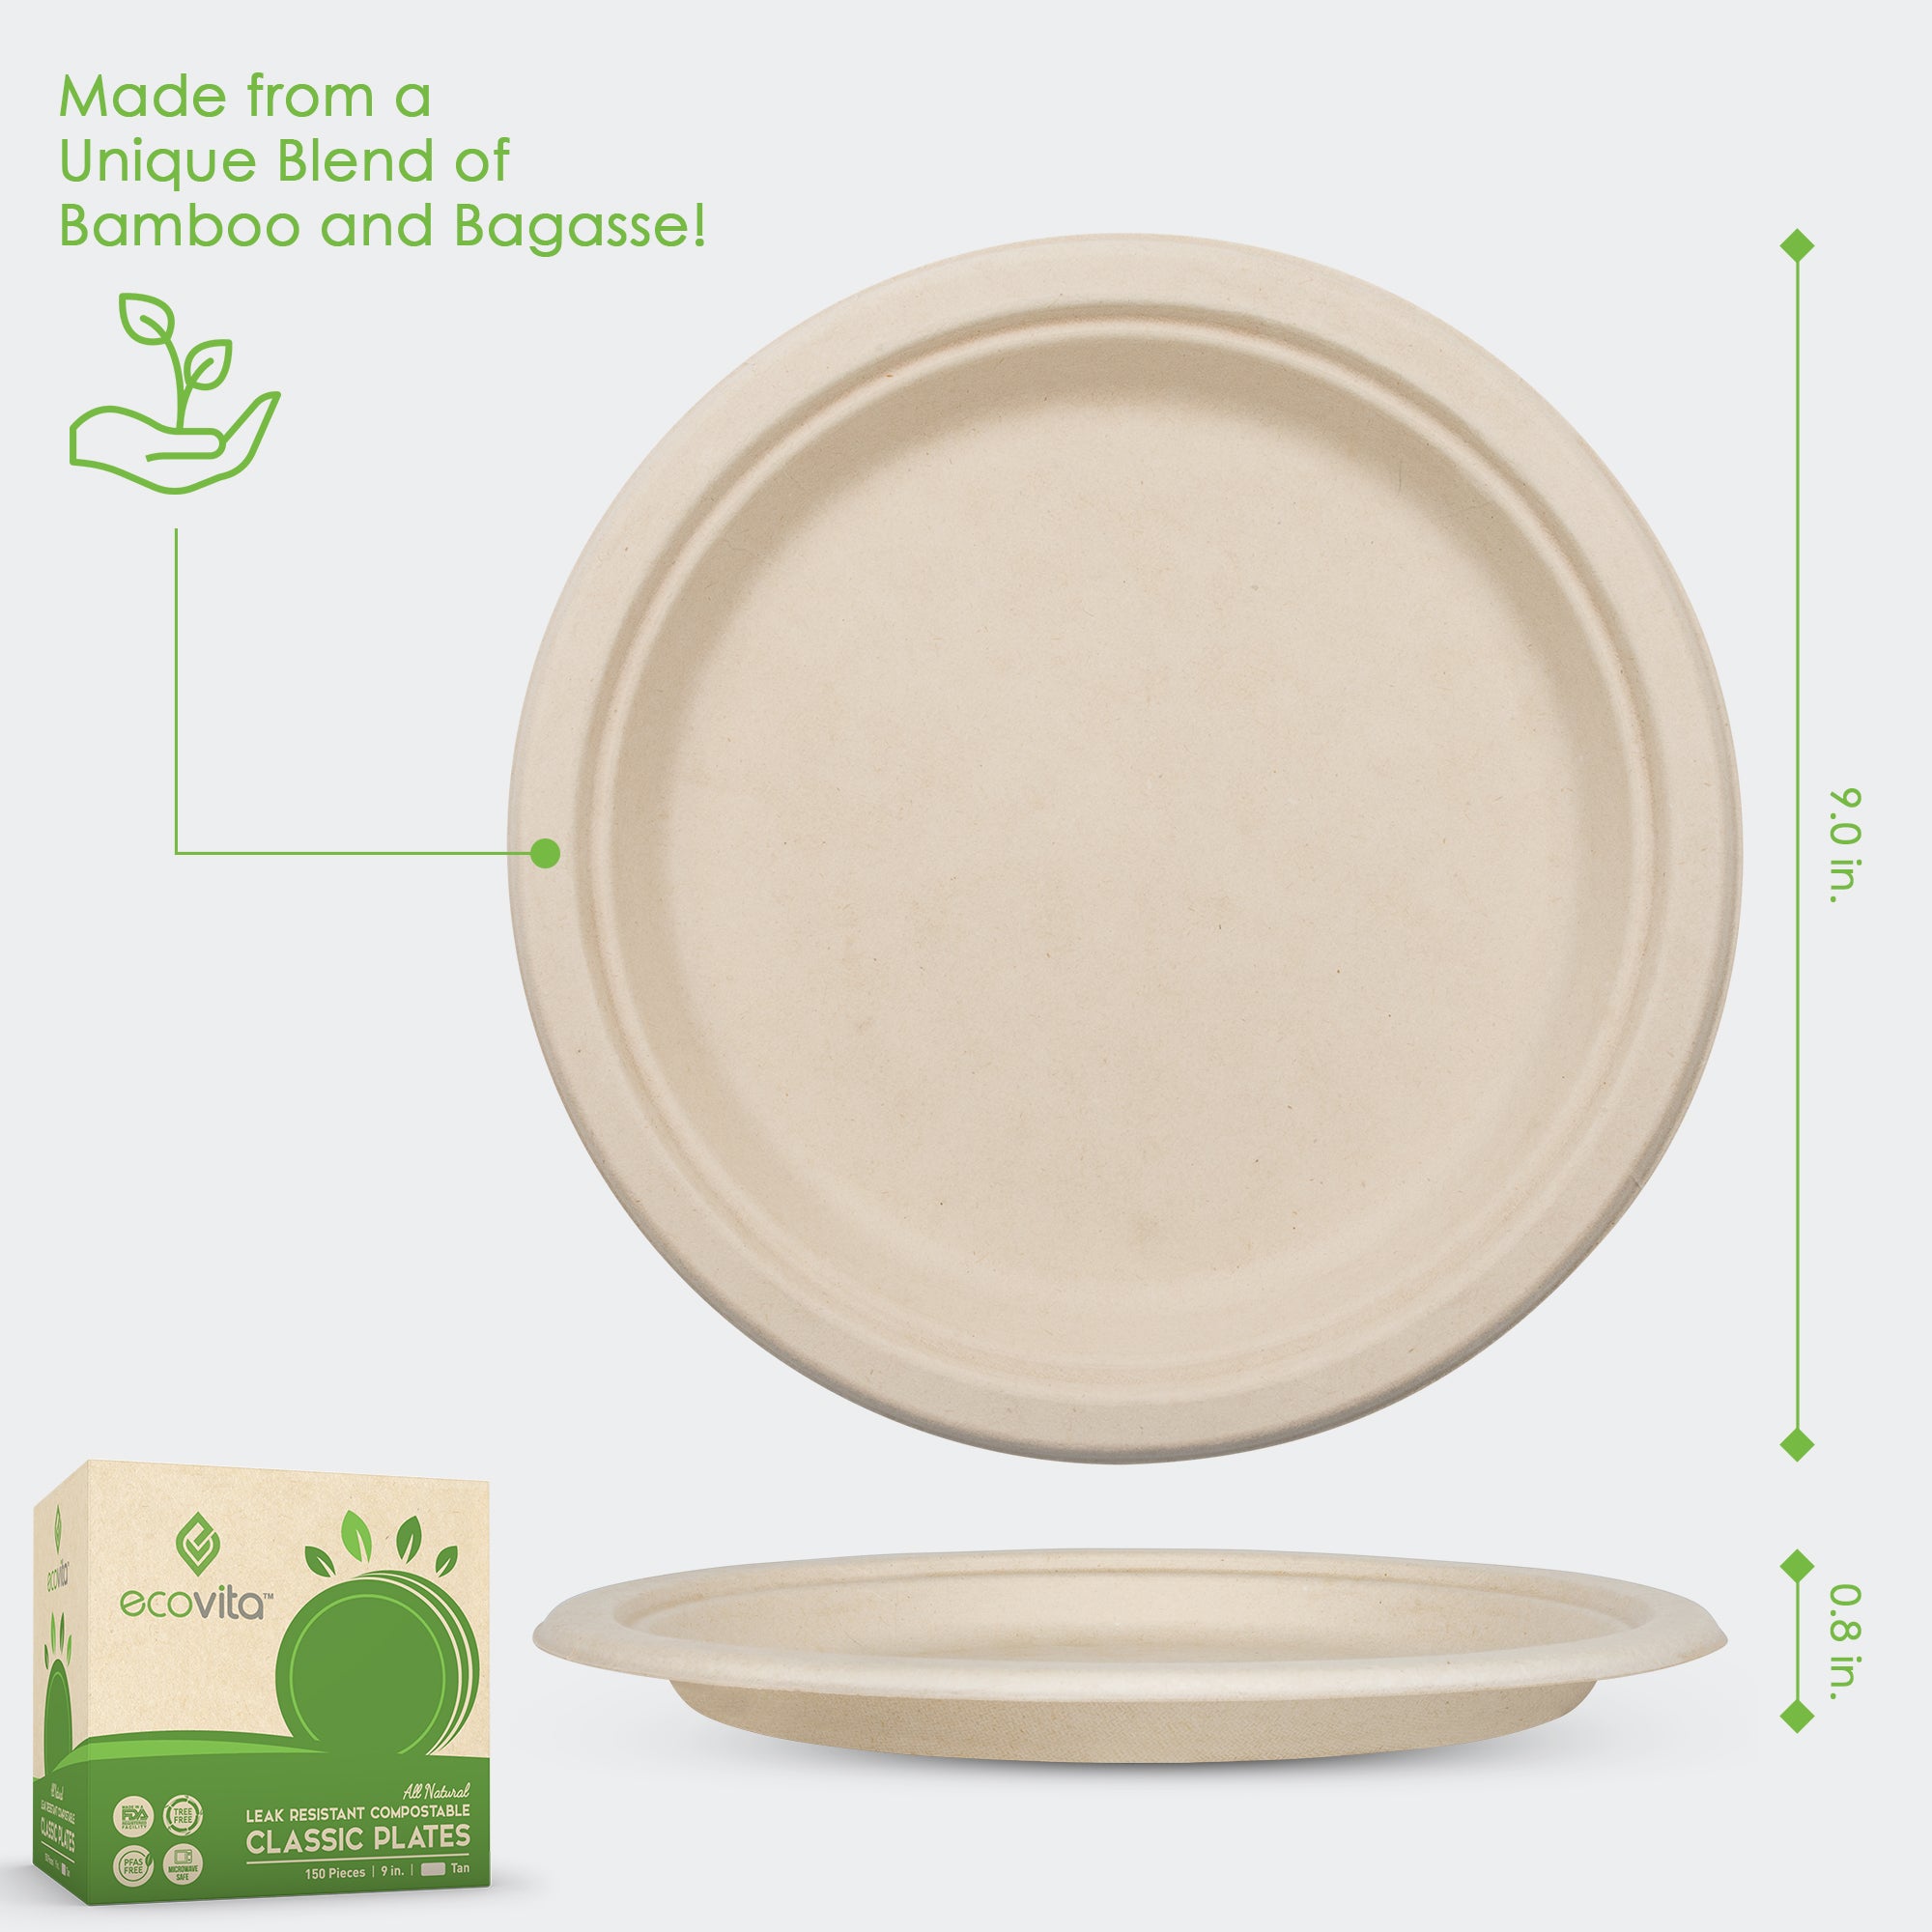 Eco Biodegradable Disposable Sugarcane Bagasse Party Plates 9 Inch